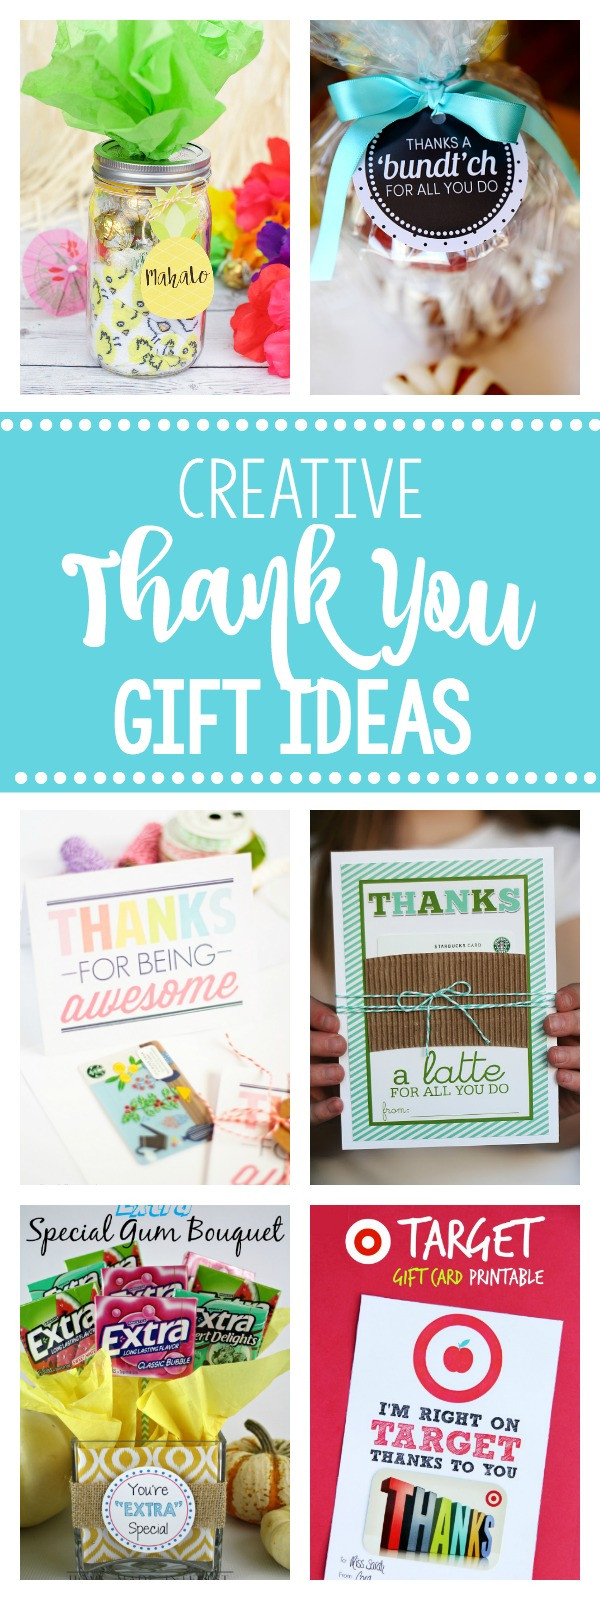 Special Thank You Gift Ideas
 25 Creative & Unique Thank You Gifts – Fun Squared